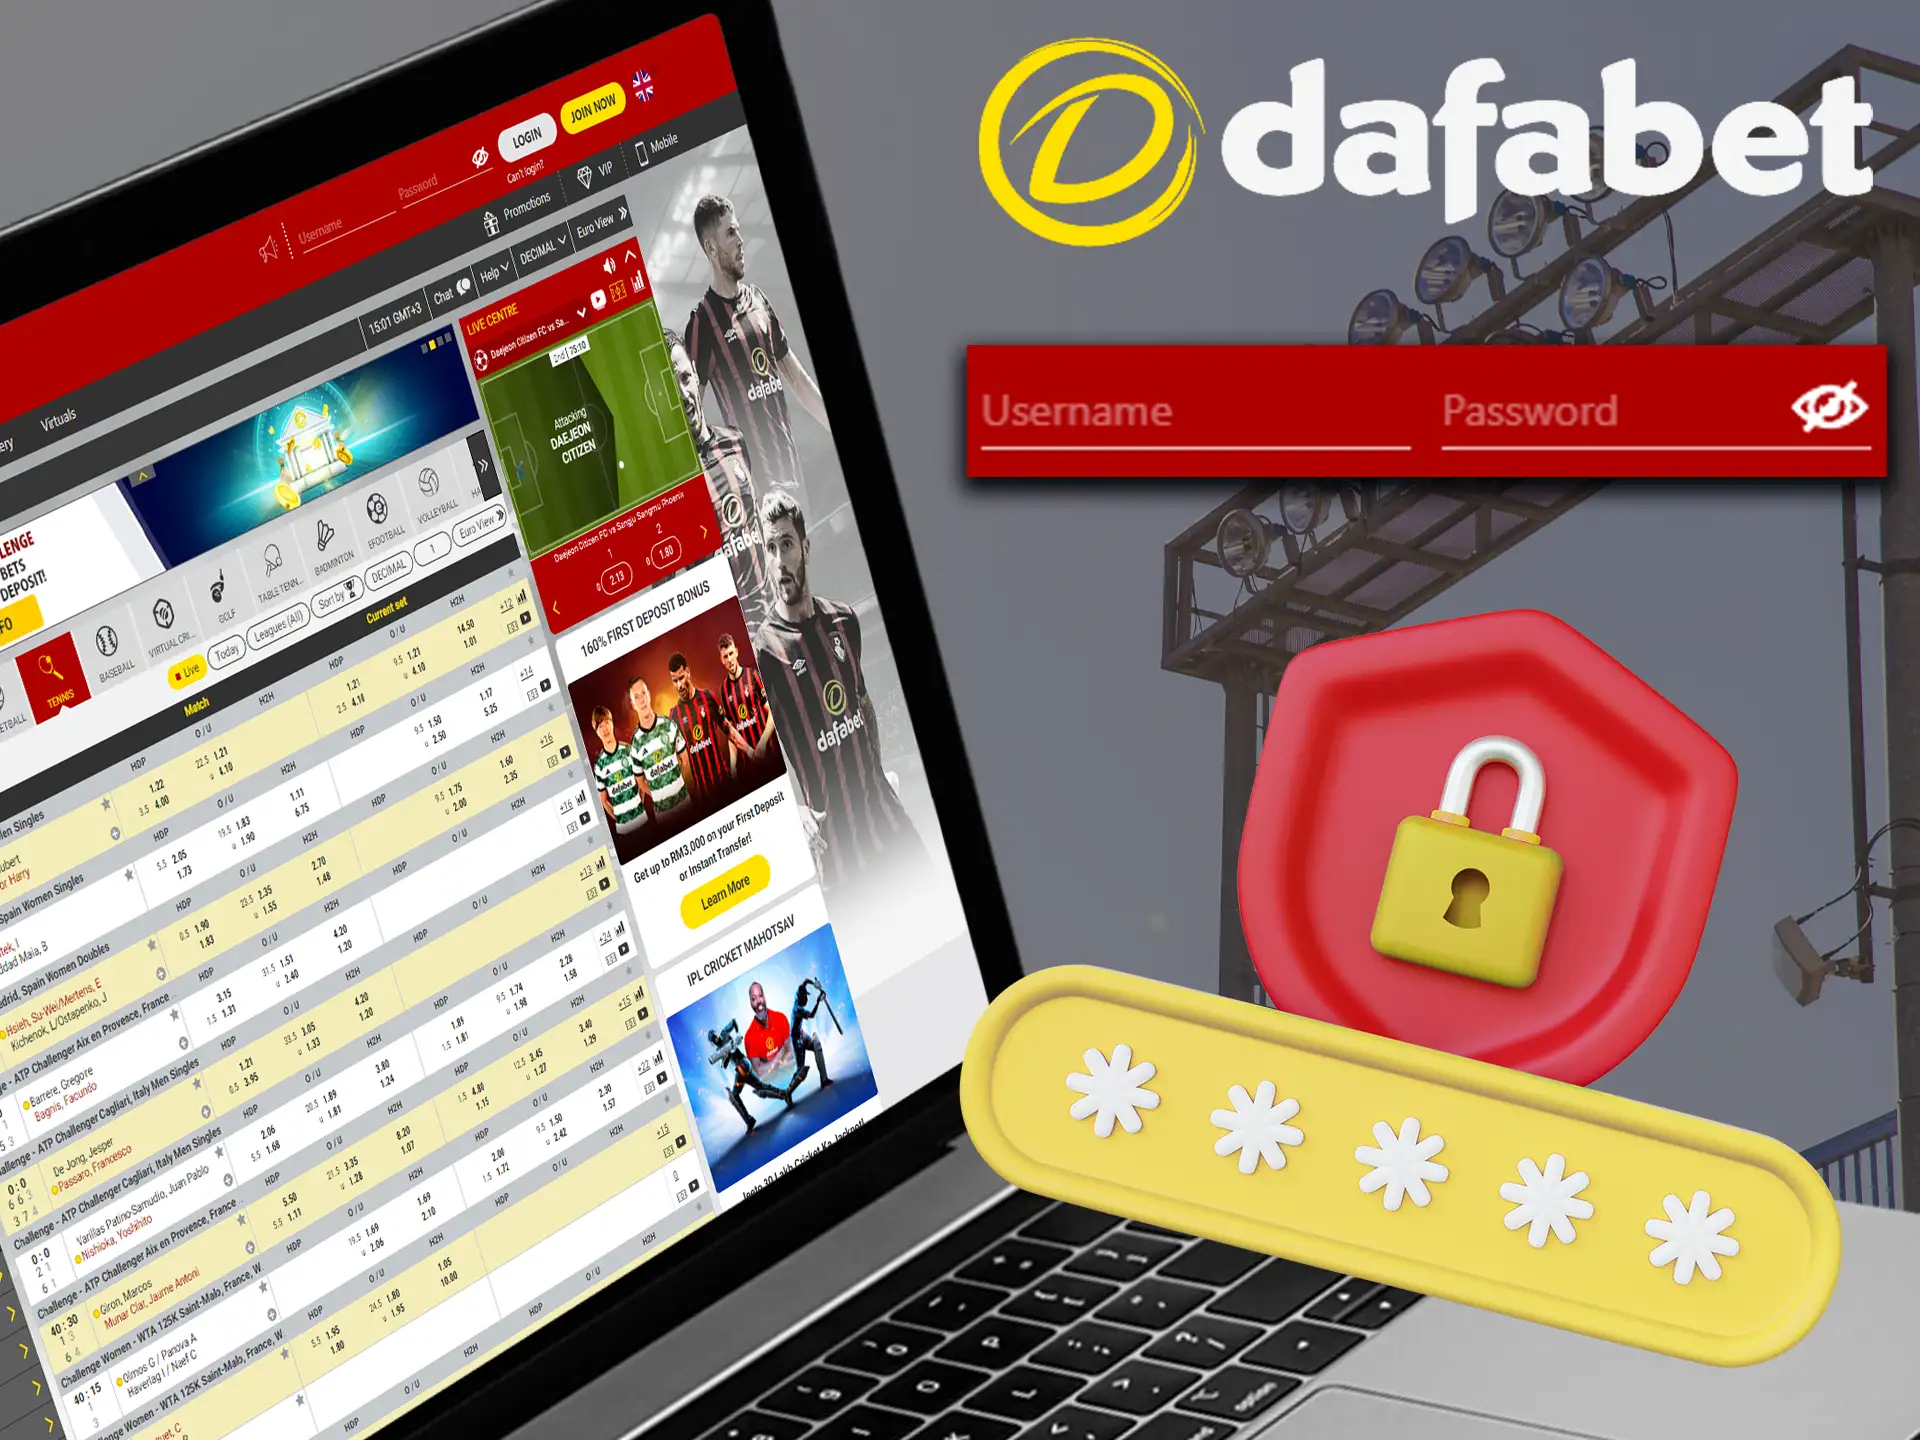 Go through the Dafabet login process to access it and start betting.